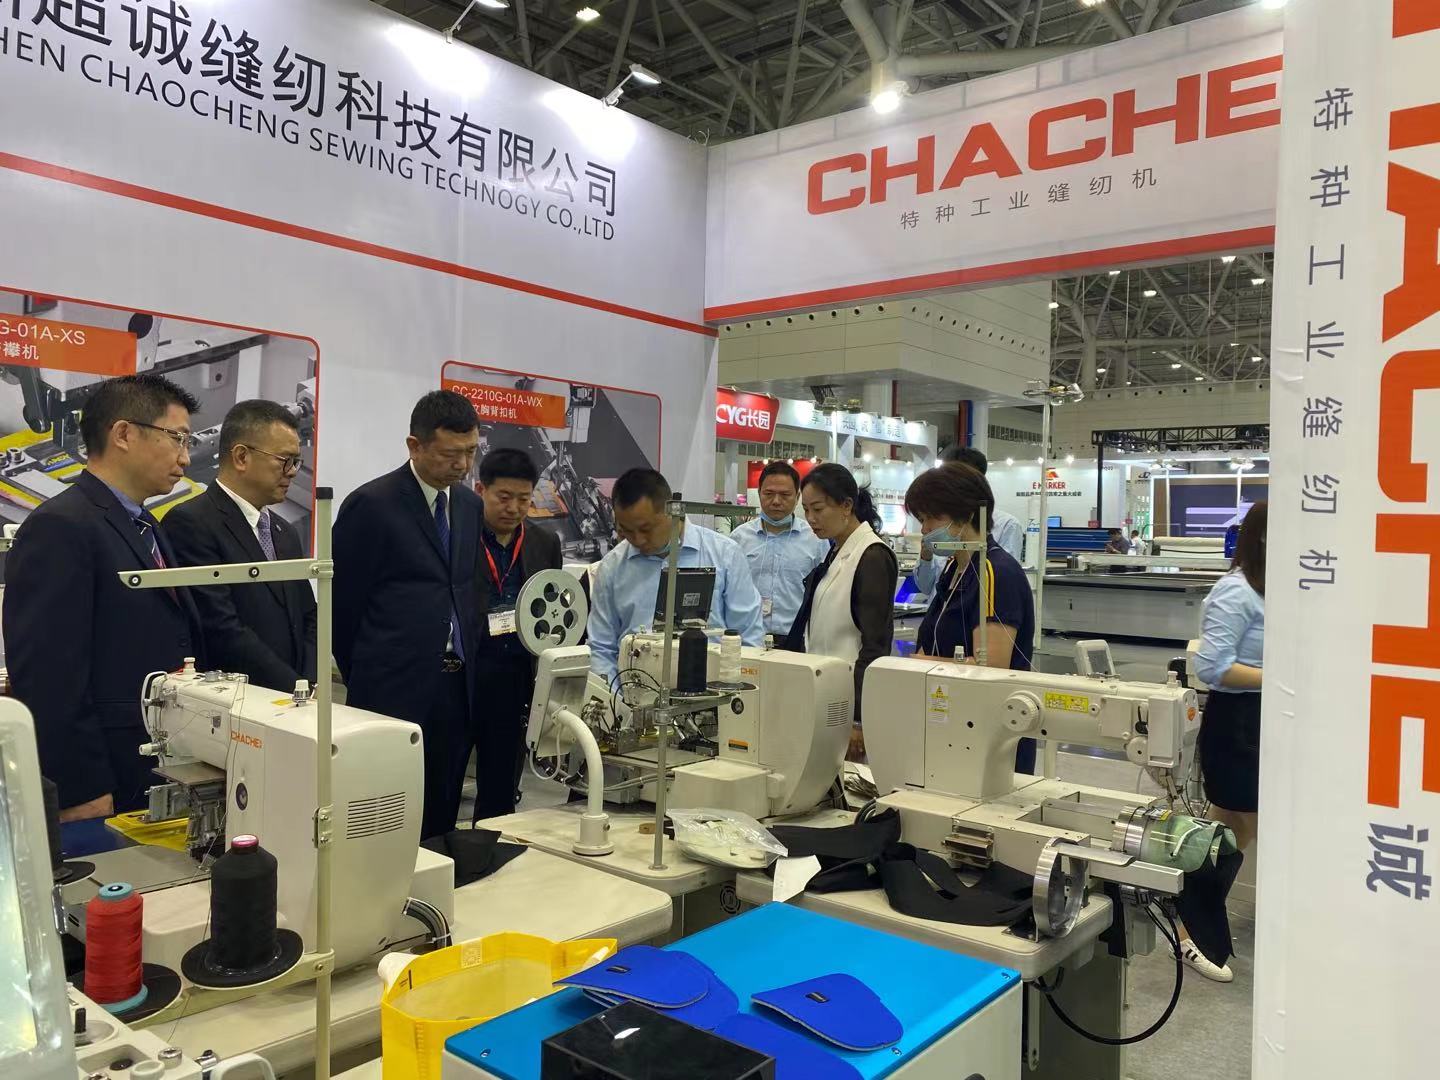 Customers are checking the template exchanging system in our computerized sewing machine.  a